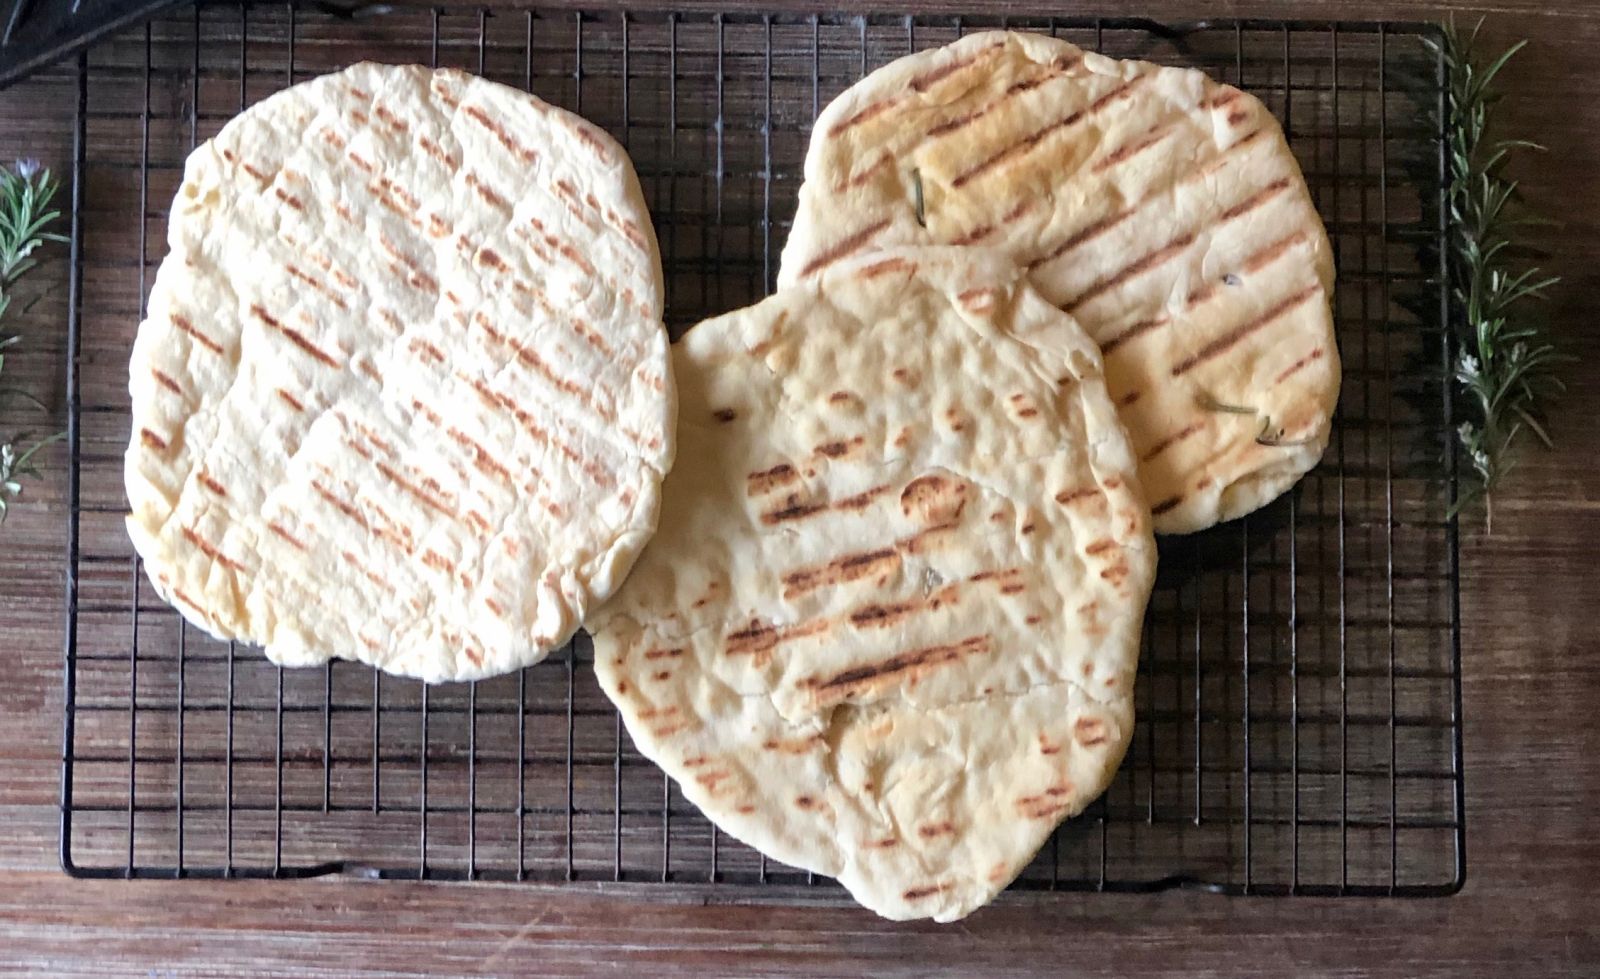 Flatbread that's been cooked on a BBQ